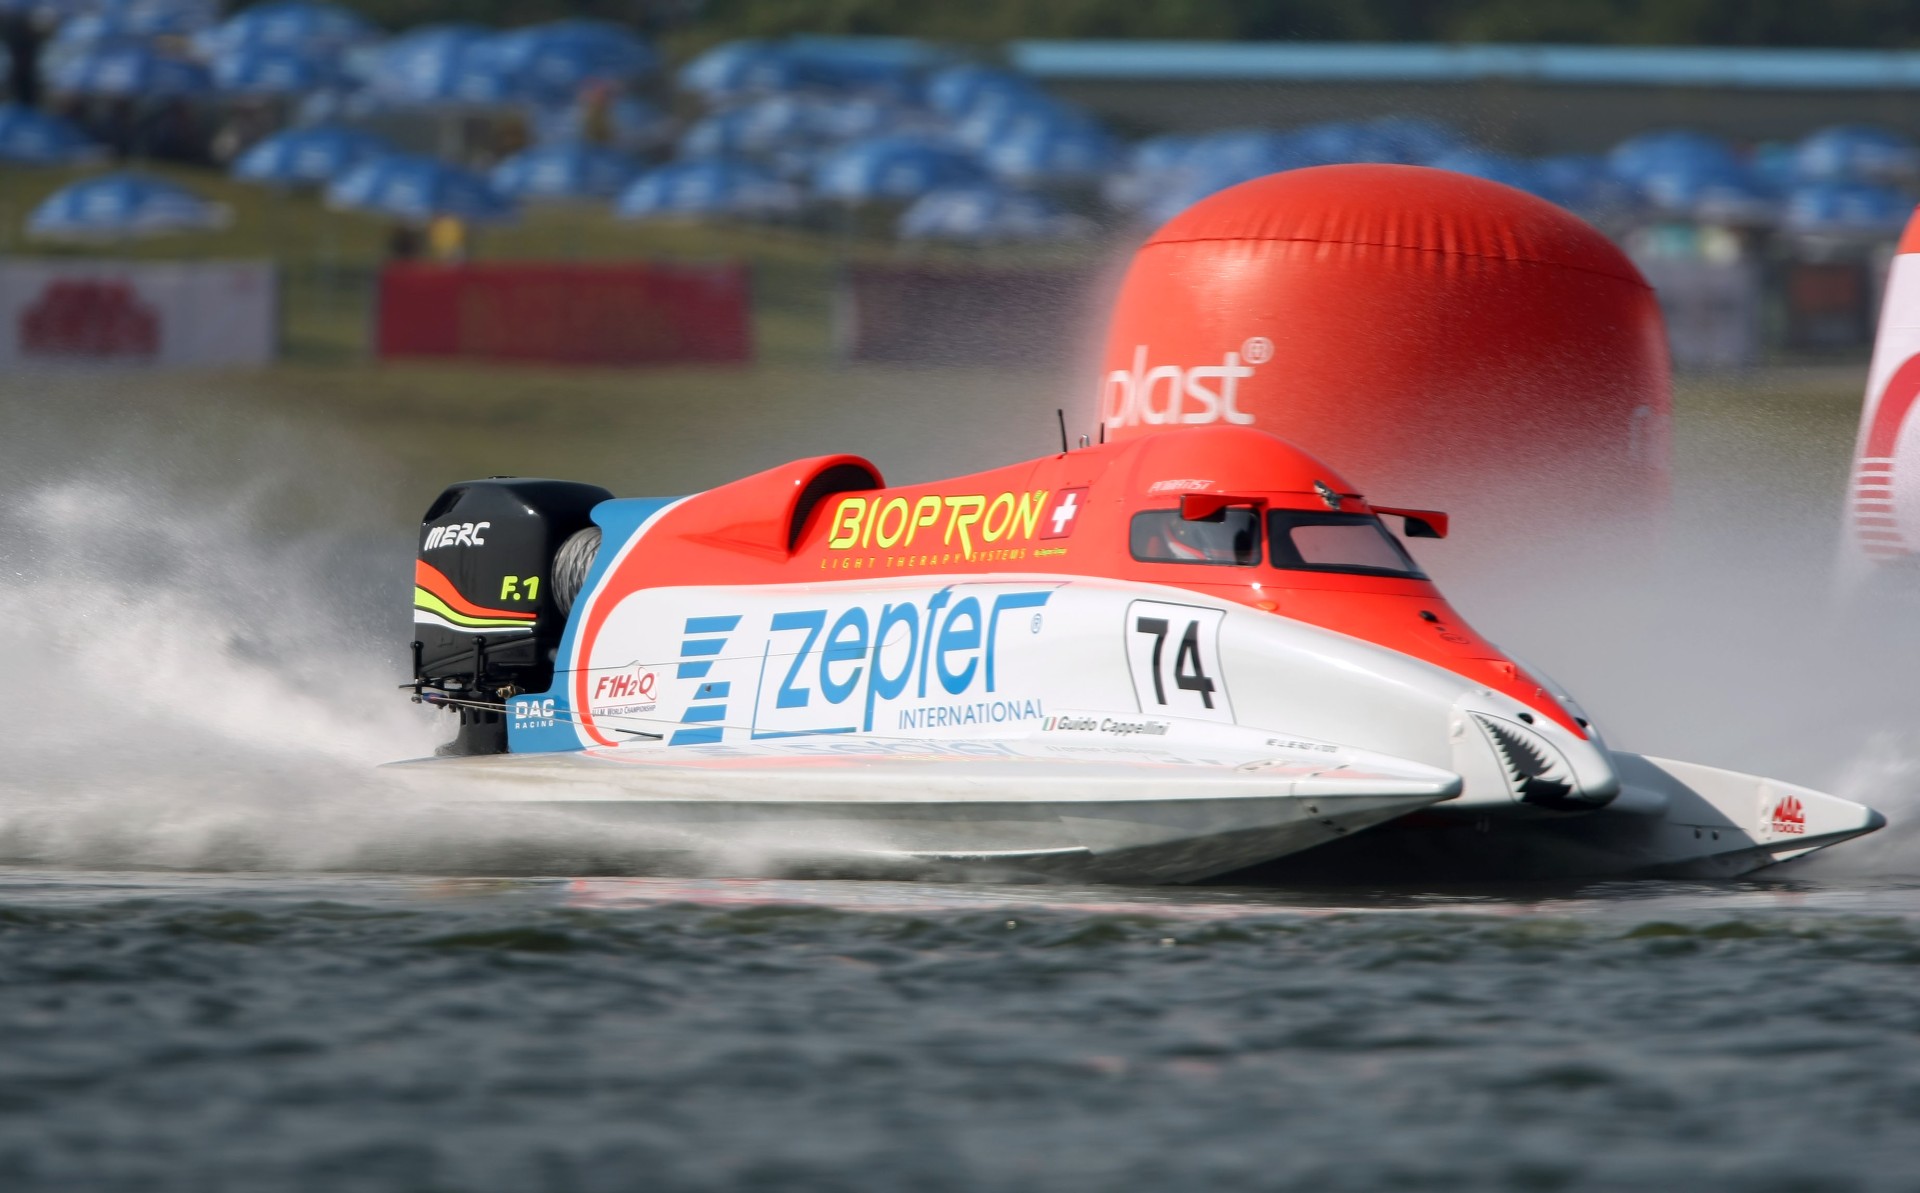 GP OF CHINA SHENZHEN-181009-Guido Cappellini of Italy of the Zepter Team during time trials for the UIM F1 Powerboat Grand Prix of China, at the Shenzhen Bay Inner Lake, Shenzhen, China. The second race in China is the 5th leg of the season, October 17-18, 2009. Picture by Paul Lakatos/Idea Marketing.